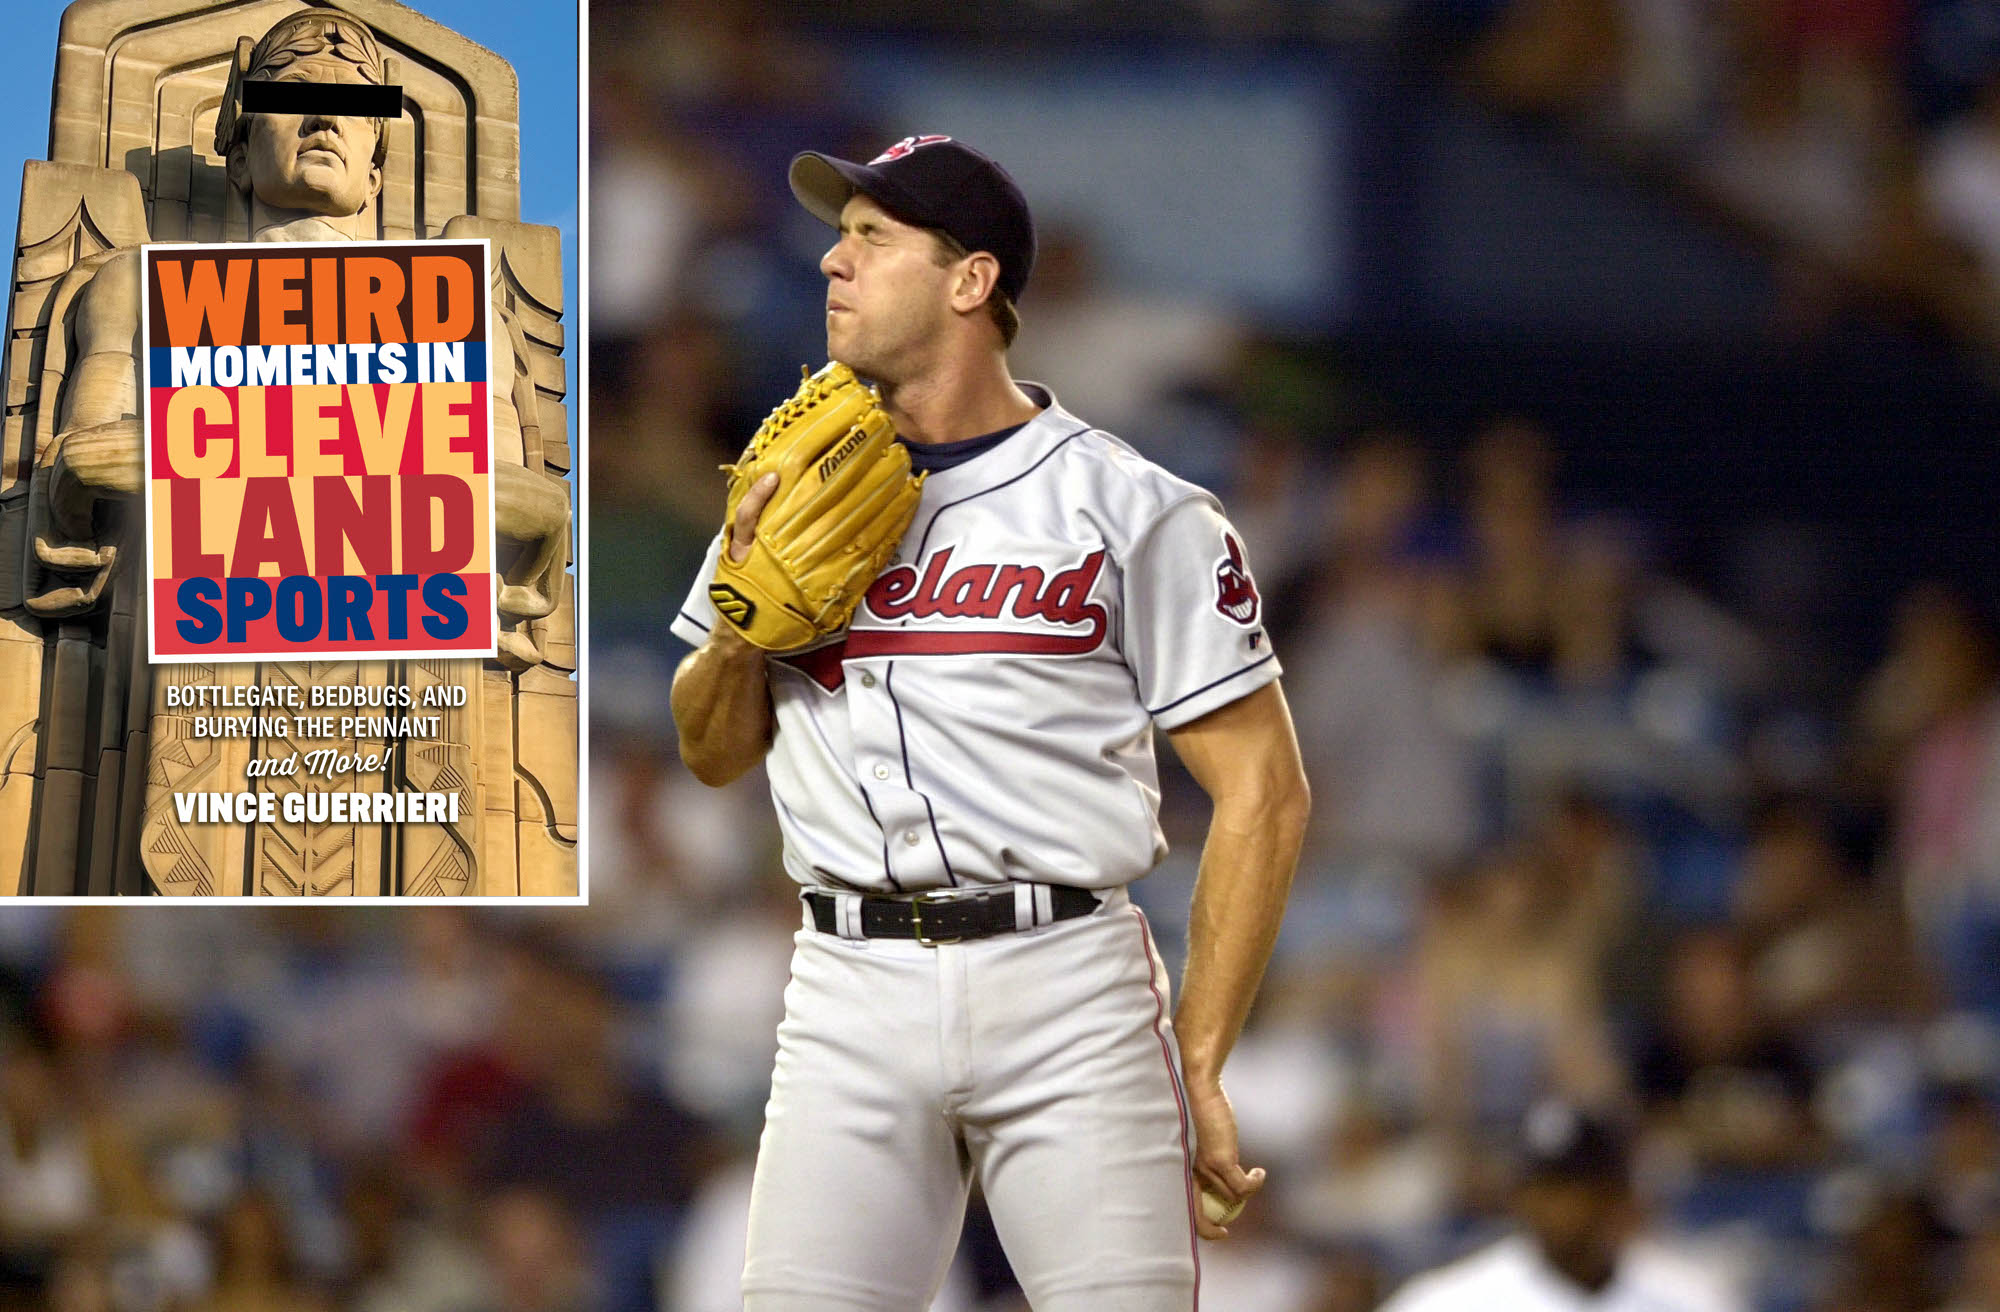 26 Jun 2001: John Rocker of the Cleveland Indians prepares for a pitch during the game against the New York Yankees at Yankee Stadium in the Bronx, New York. The Indians beat the Yankees 5-3. DIGITAL IMAGE. Mandatory Credit: Ezra Shaw/Allsport